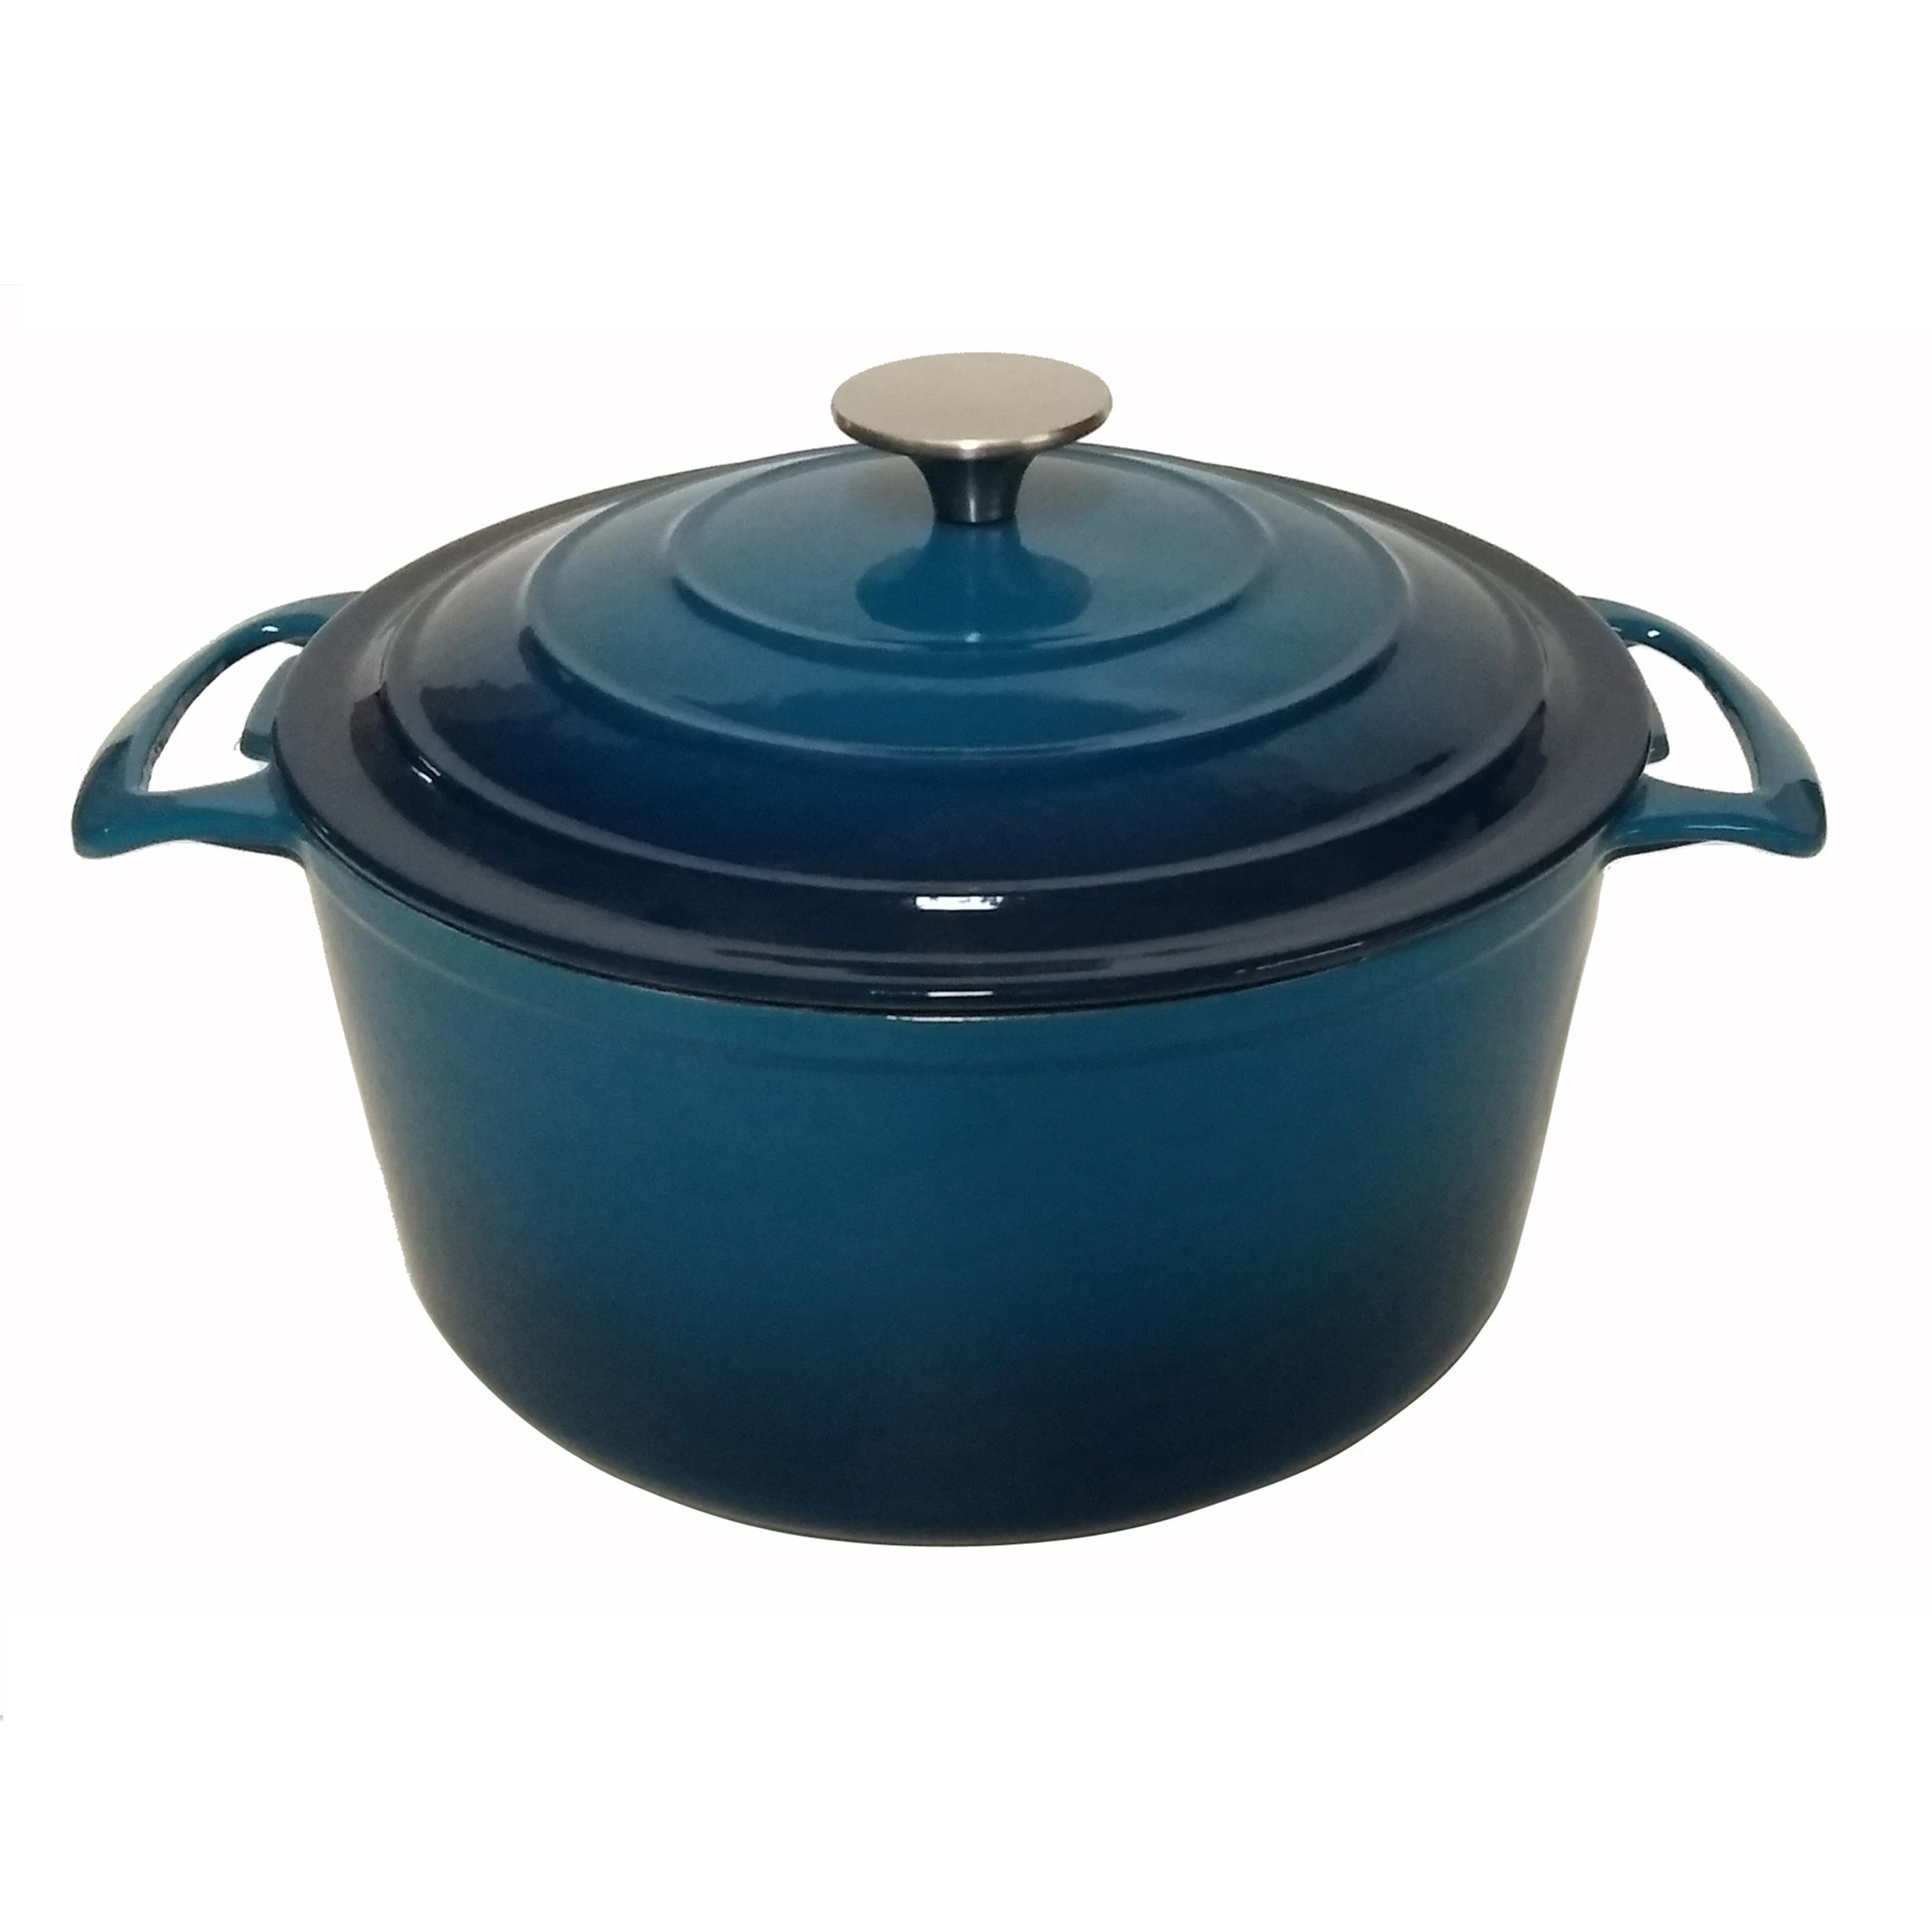 5.5QT Cast Iron Enamel Covered Round Dutch Oven With Lid